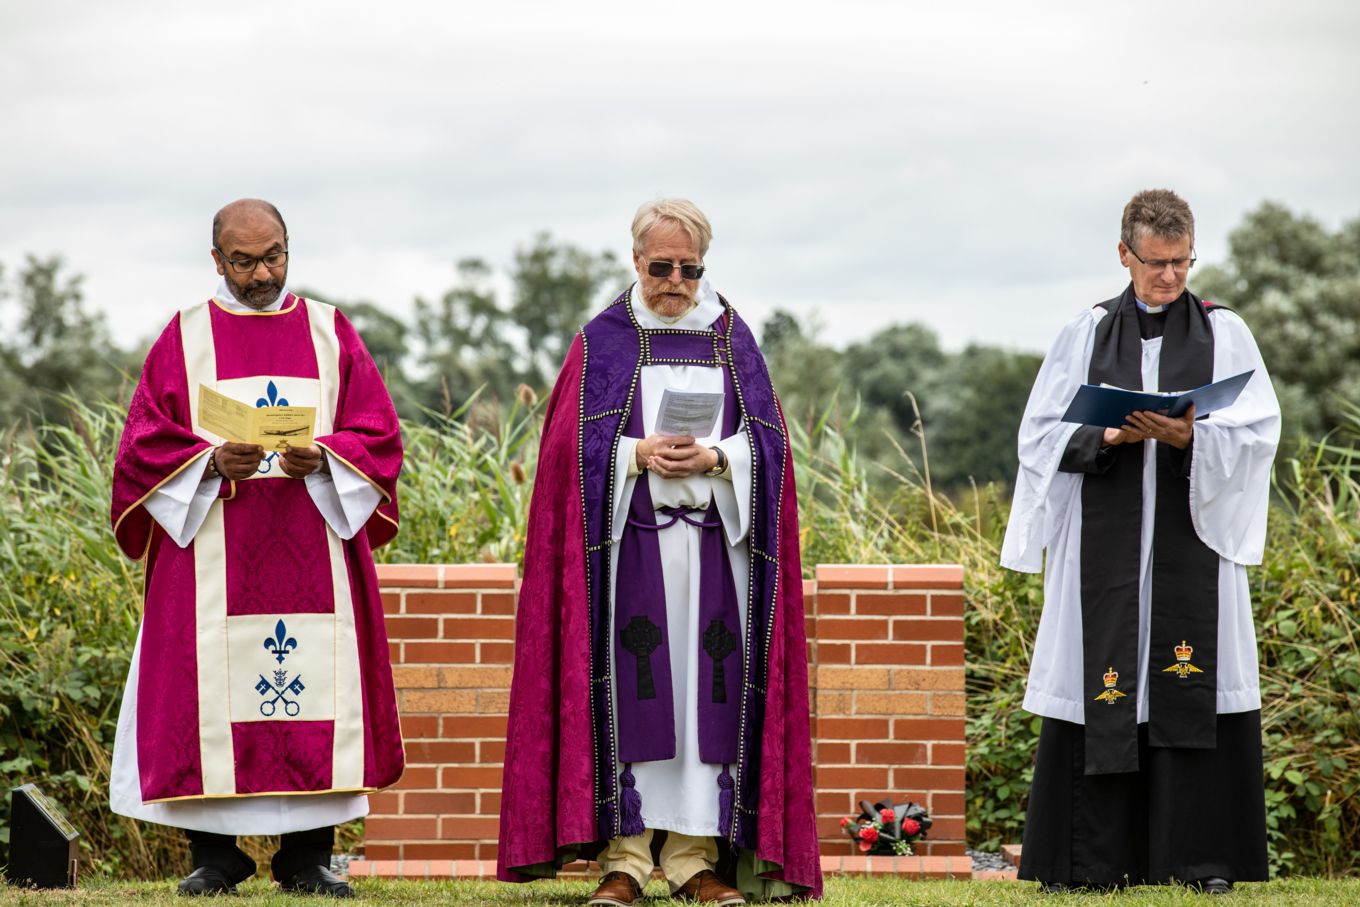 From left to right: Father Jacob Cheriyan (Prison Chaplain), Reverend Andrew Smith (St. Peter’s Church, March), Reverend Squadron Leader Andrew Tucker (RAF Wittering Chaplain)